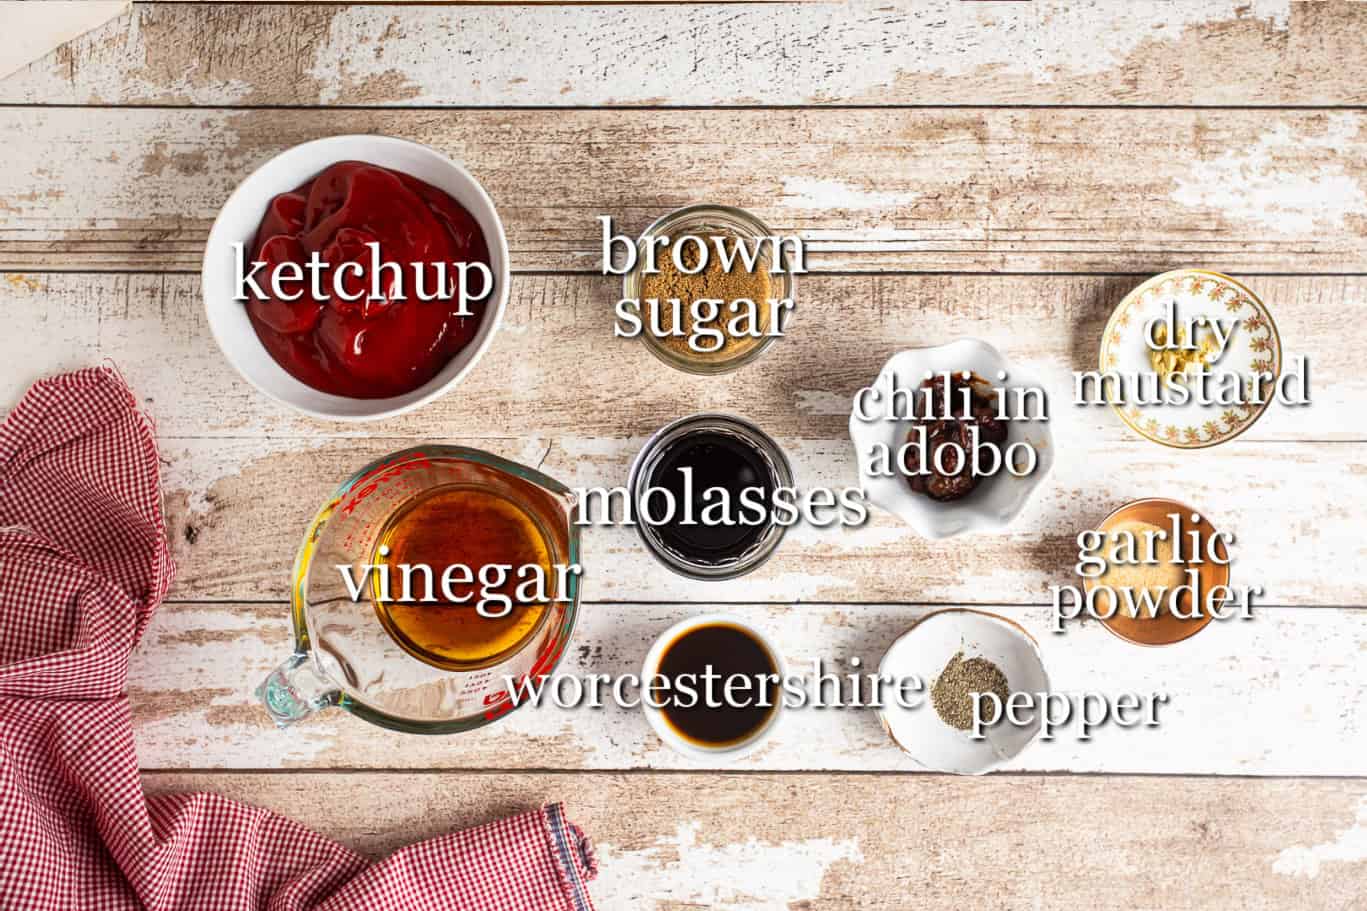 Ingredients for making barbecue sauce, with text labels.